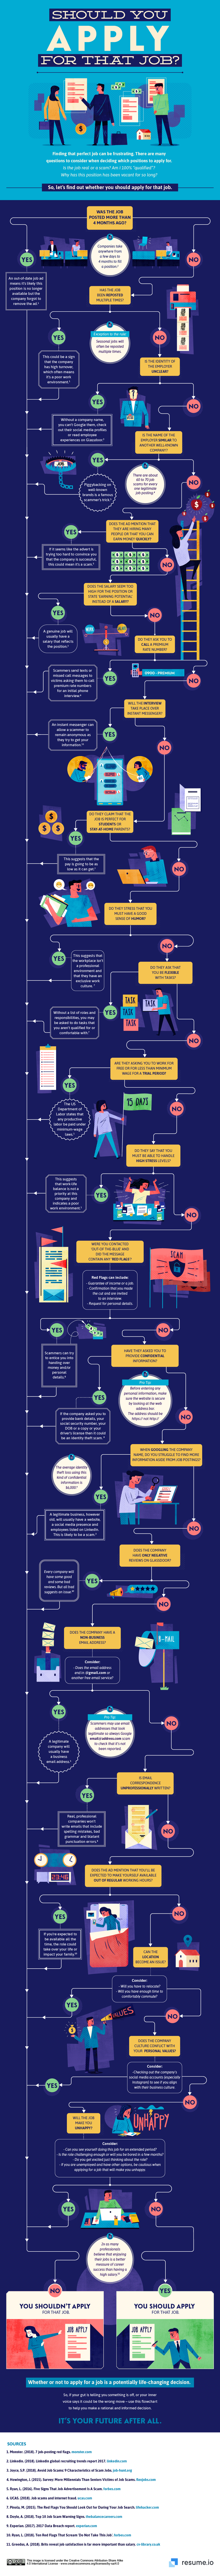 Should You Apply For That Job infographic